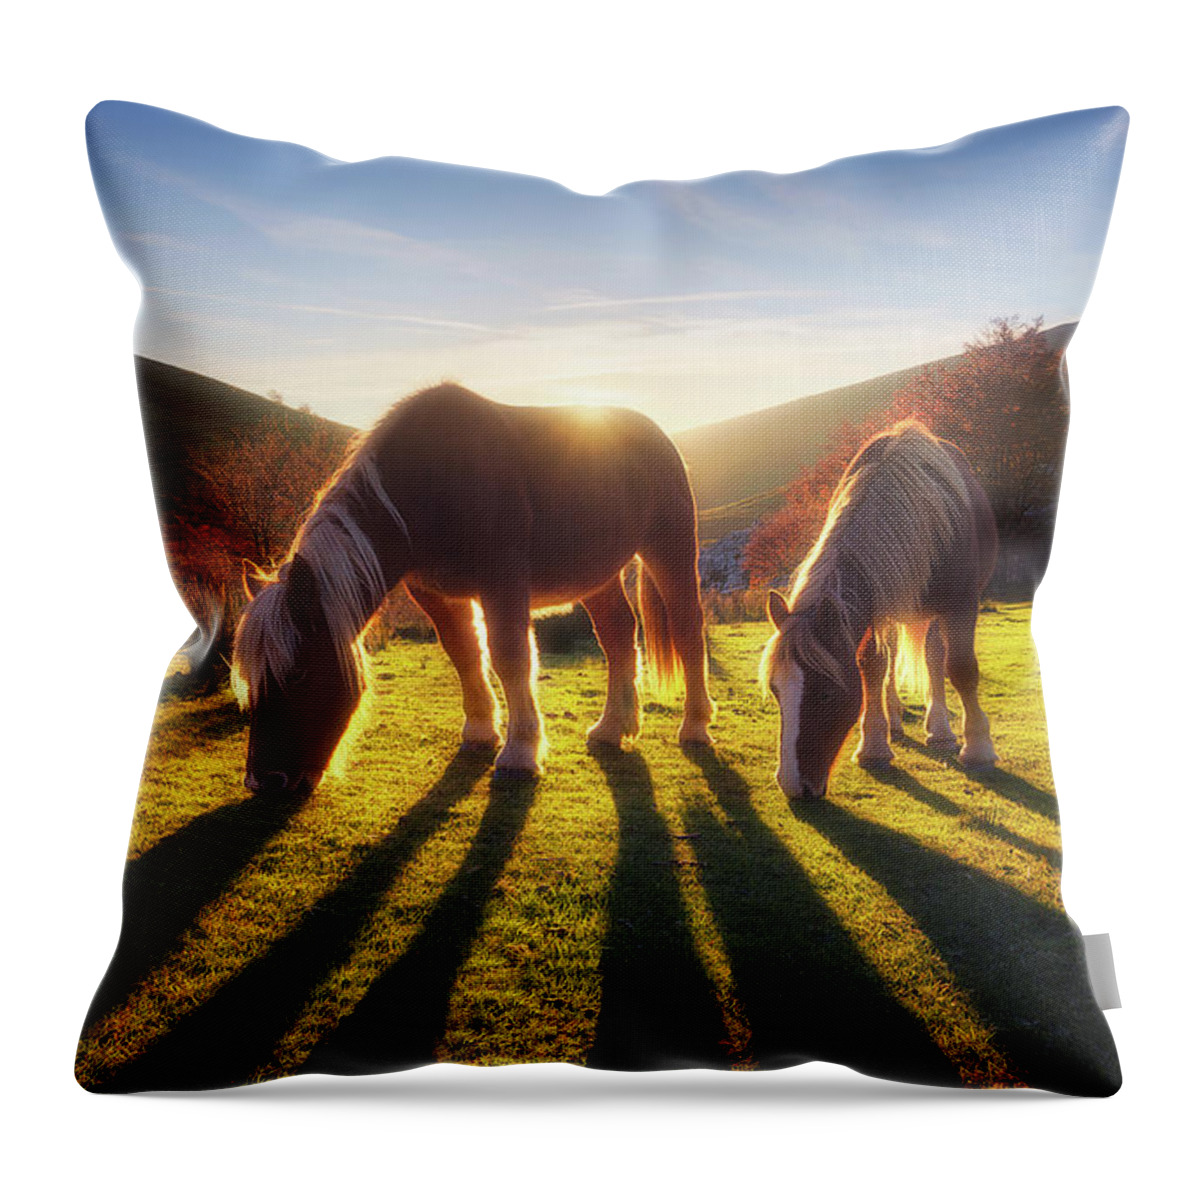 Horse Throw Pillow featuring the photograph Horses in Austigarmin by Mikel Martinez de Osaba